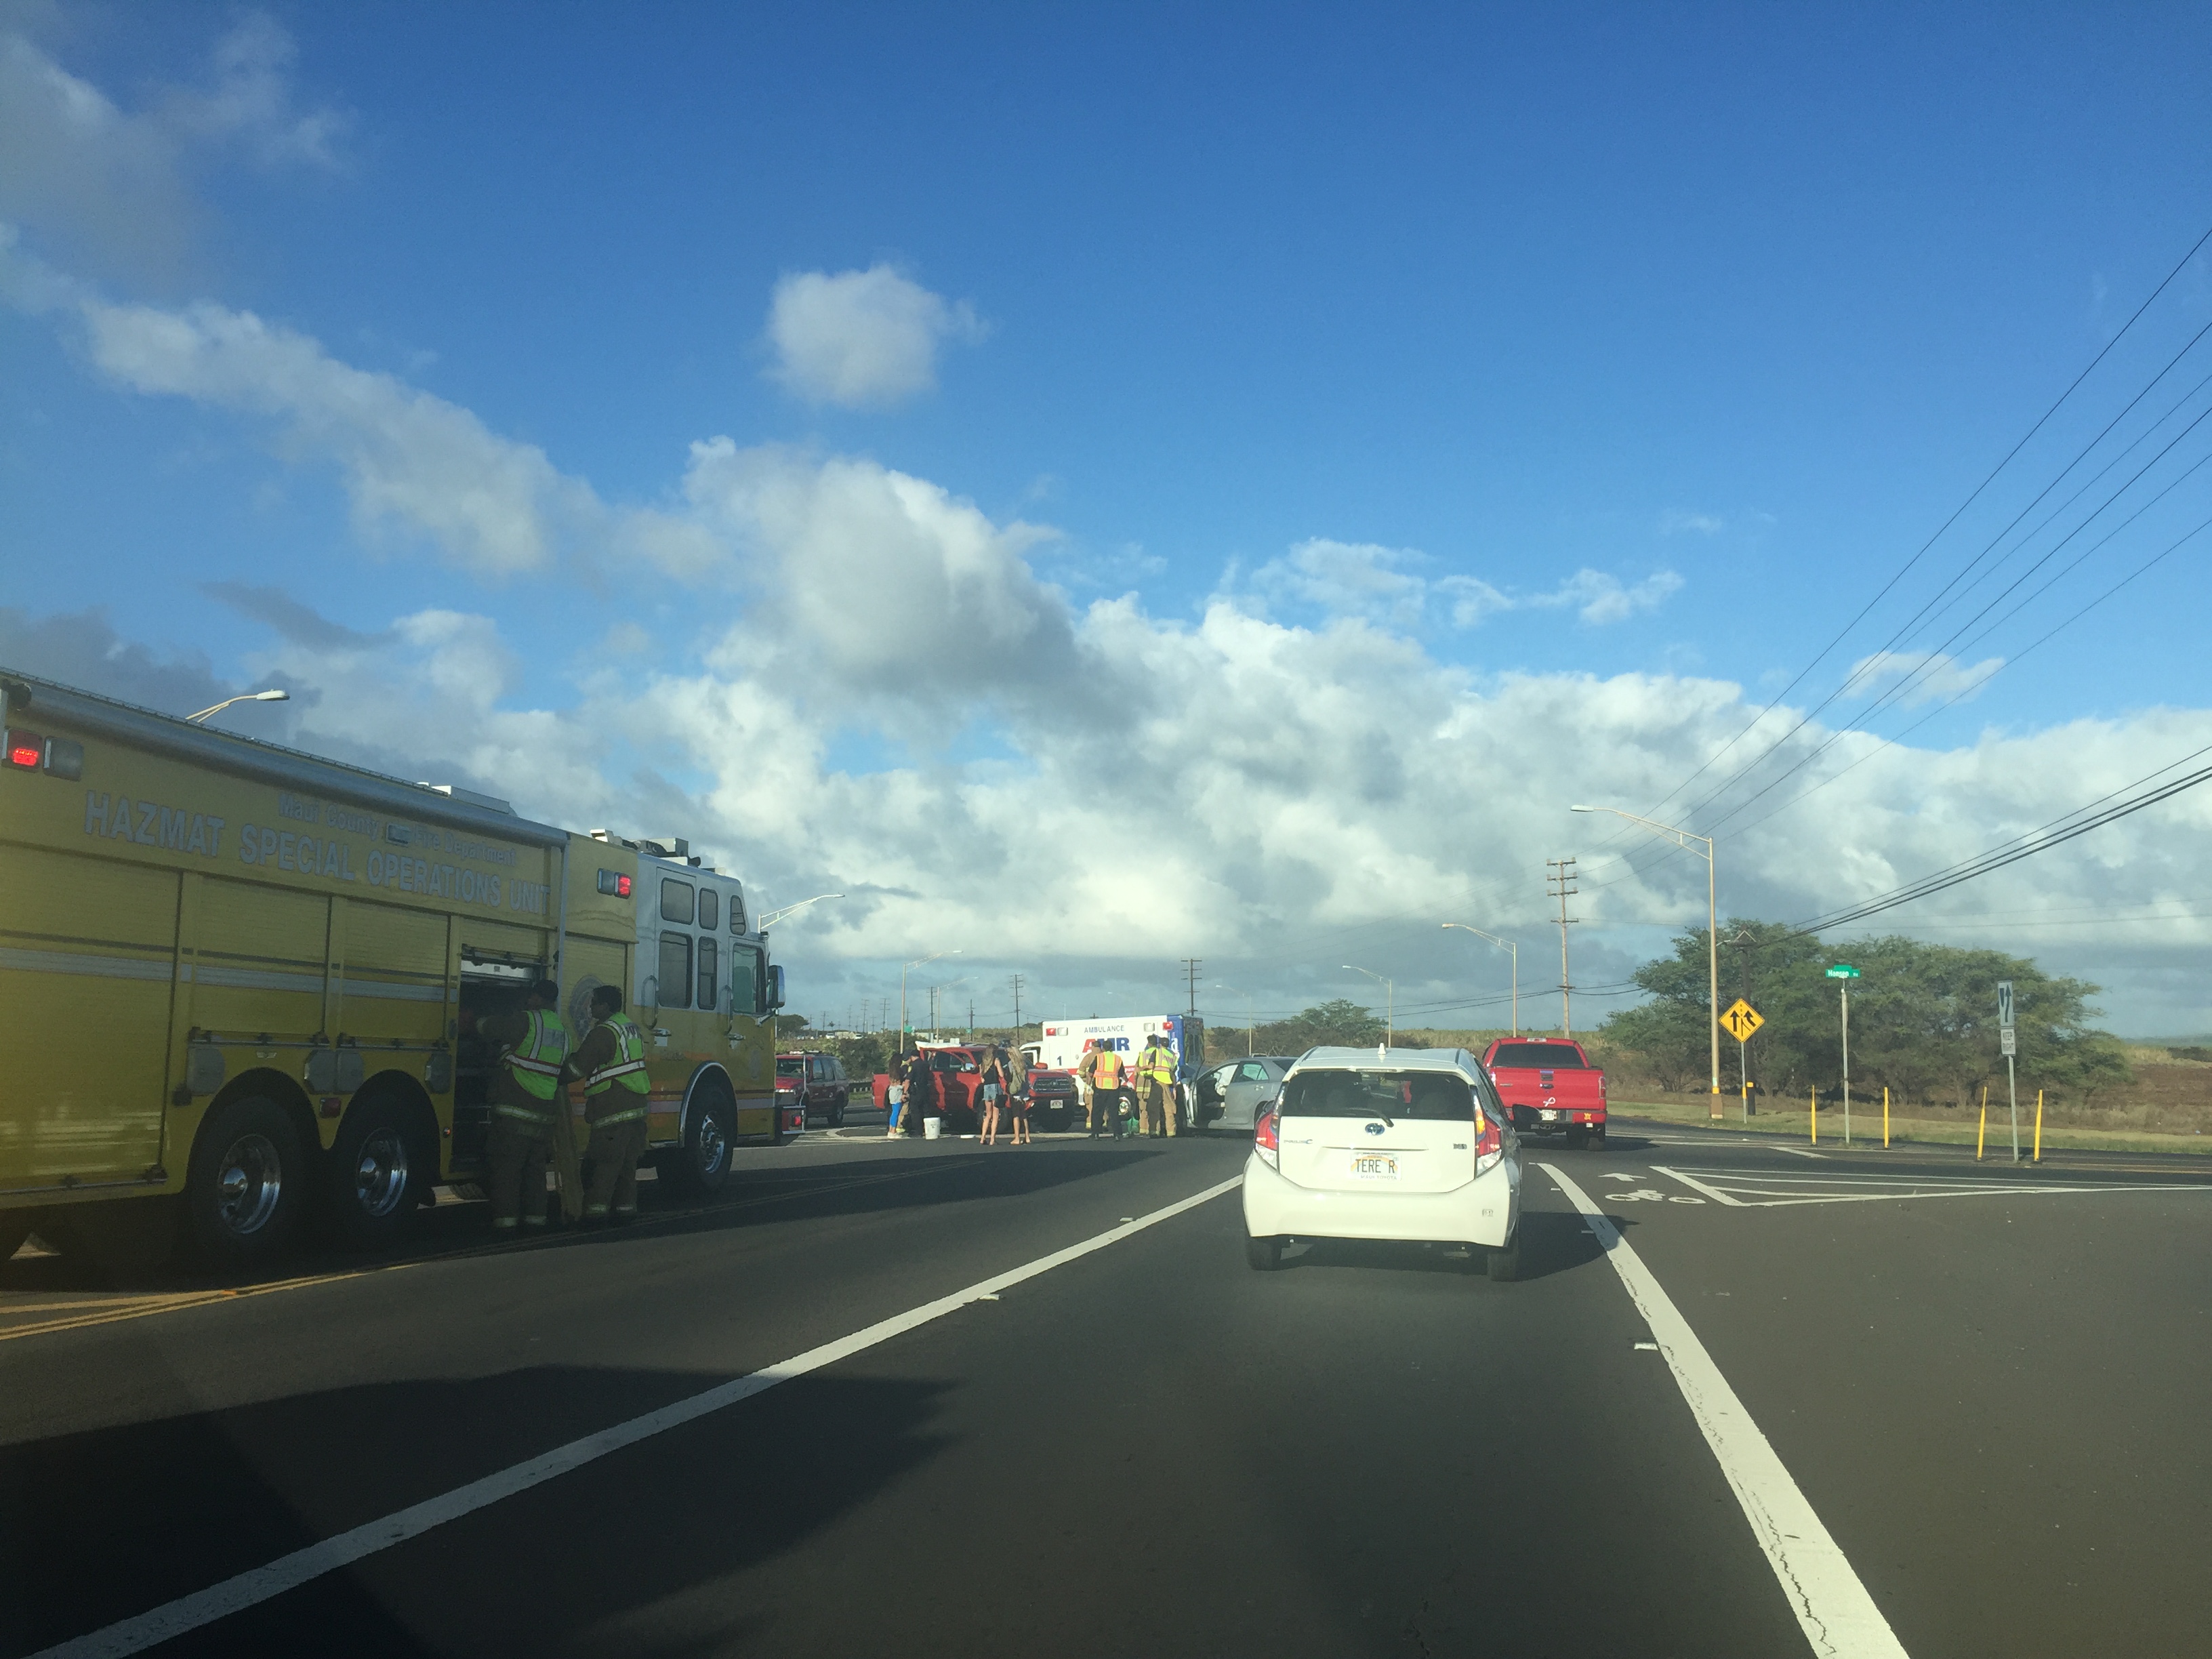 Emergency crews are on the scene of a motor vehicle accident on the Hāna Highway near the Hansen Road intersection. PC: Tara Dugan.